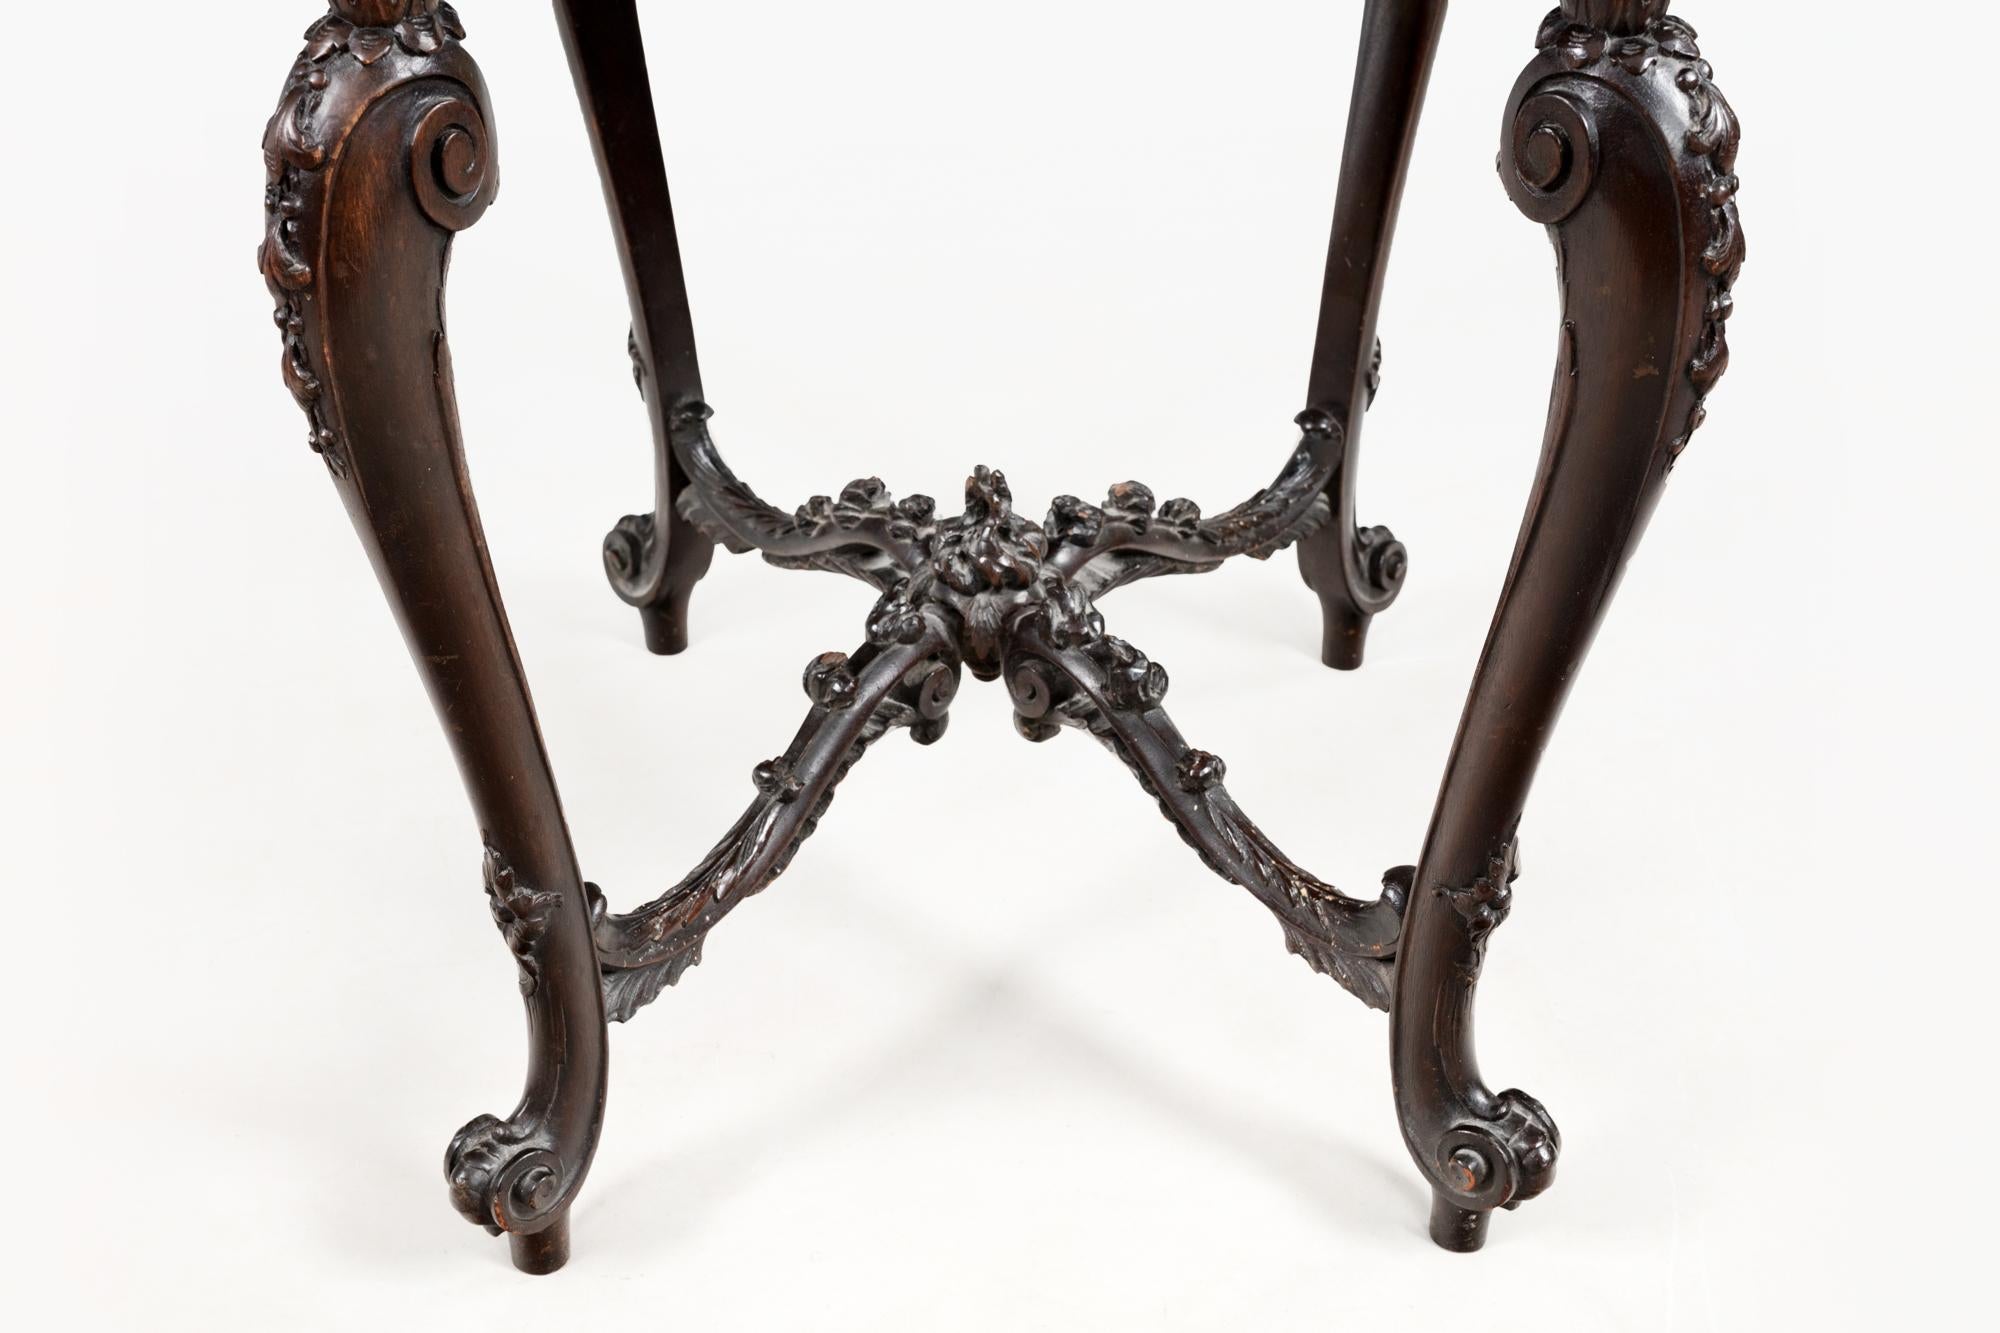 19th Century mahogany Pembroke table with Chippendale-style legs. This table features delicate beaded edging on the twin fold-out leaves which sit above a single end drawer with circular brass handles and simple inlay detailing, balanced by a false